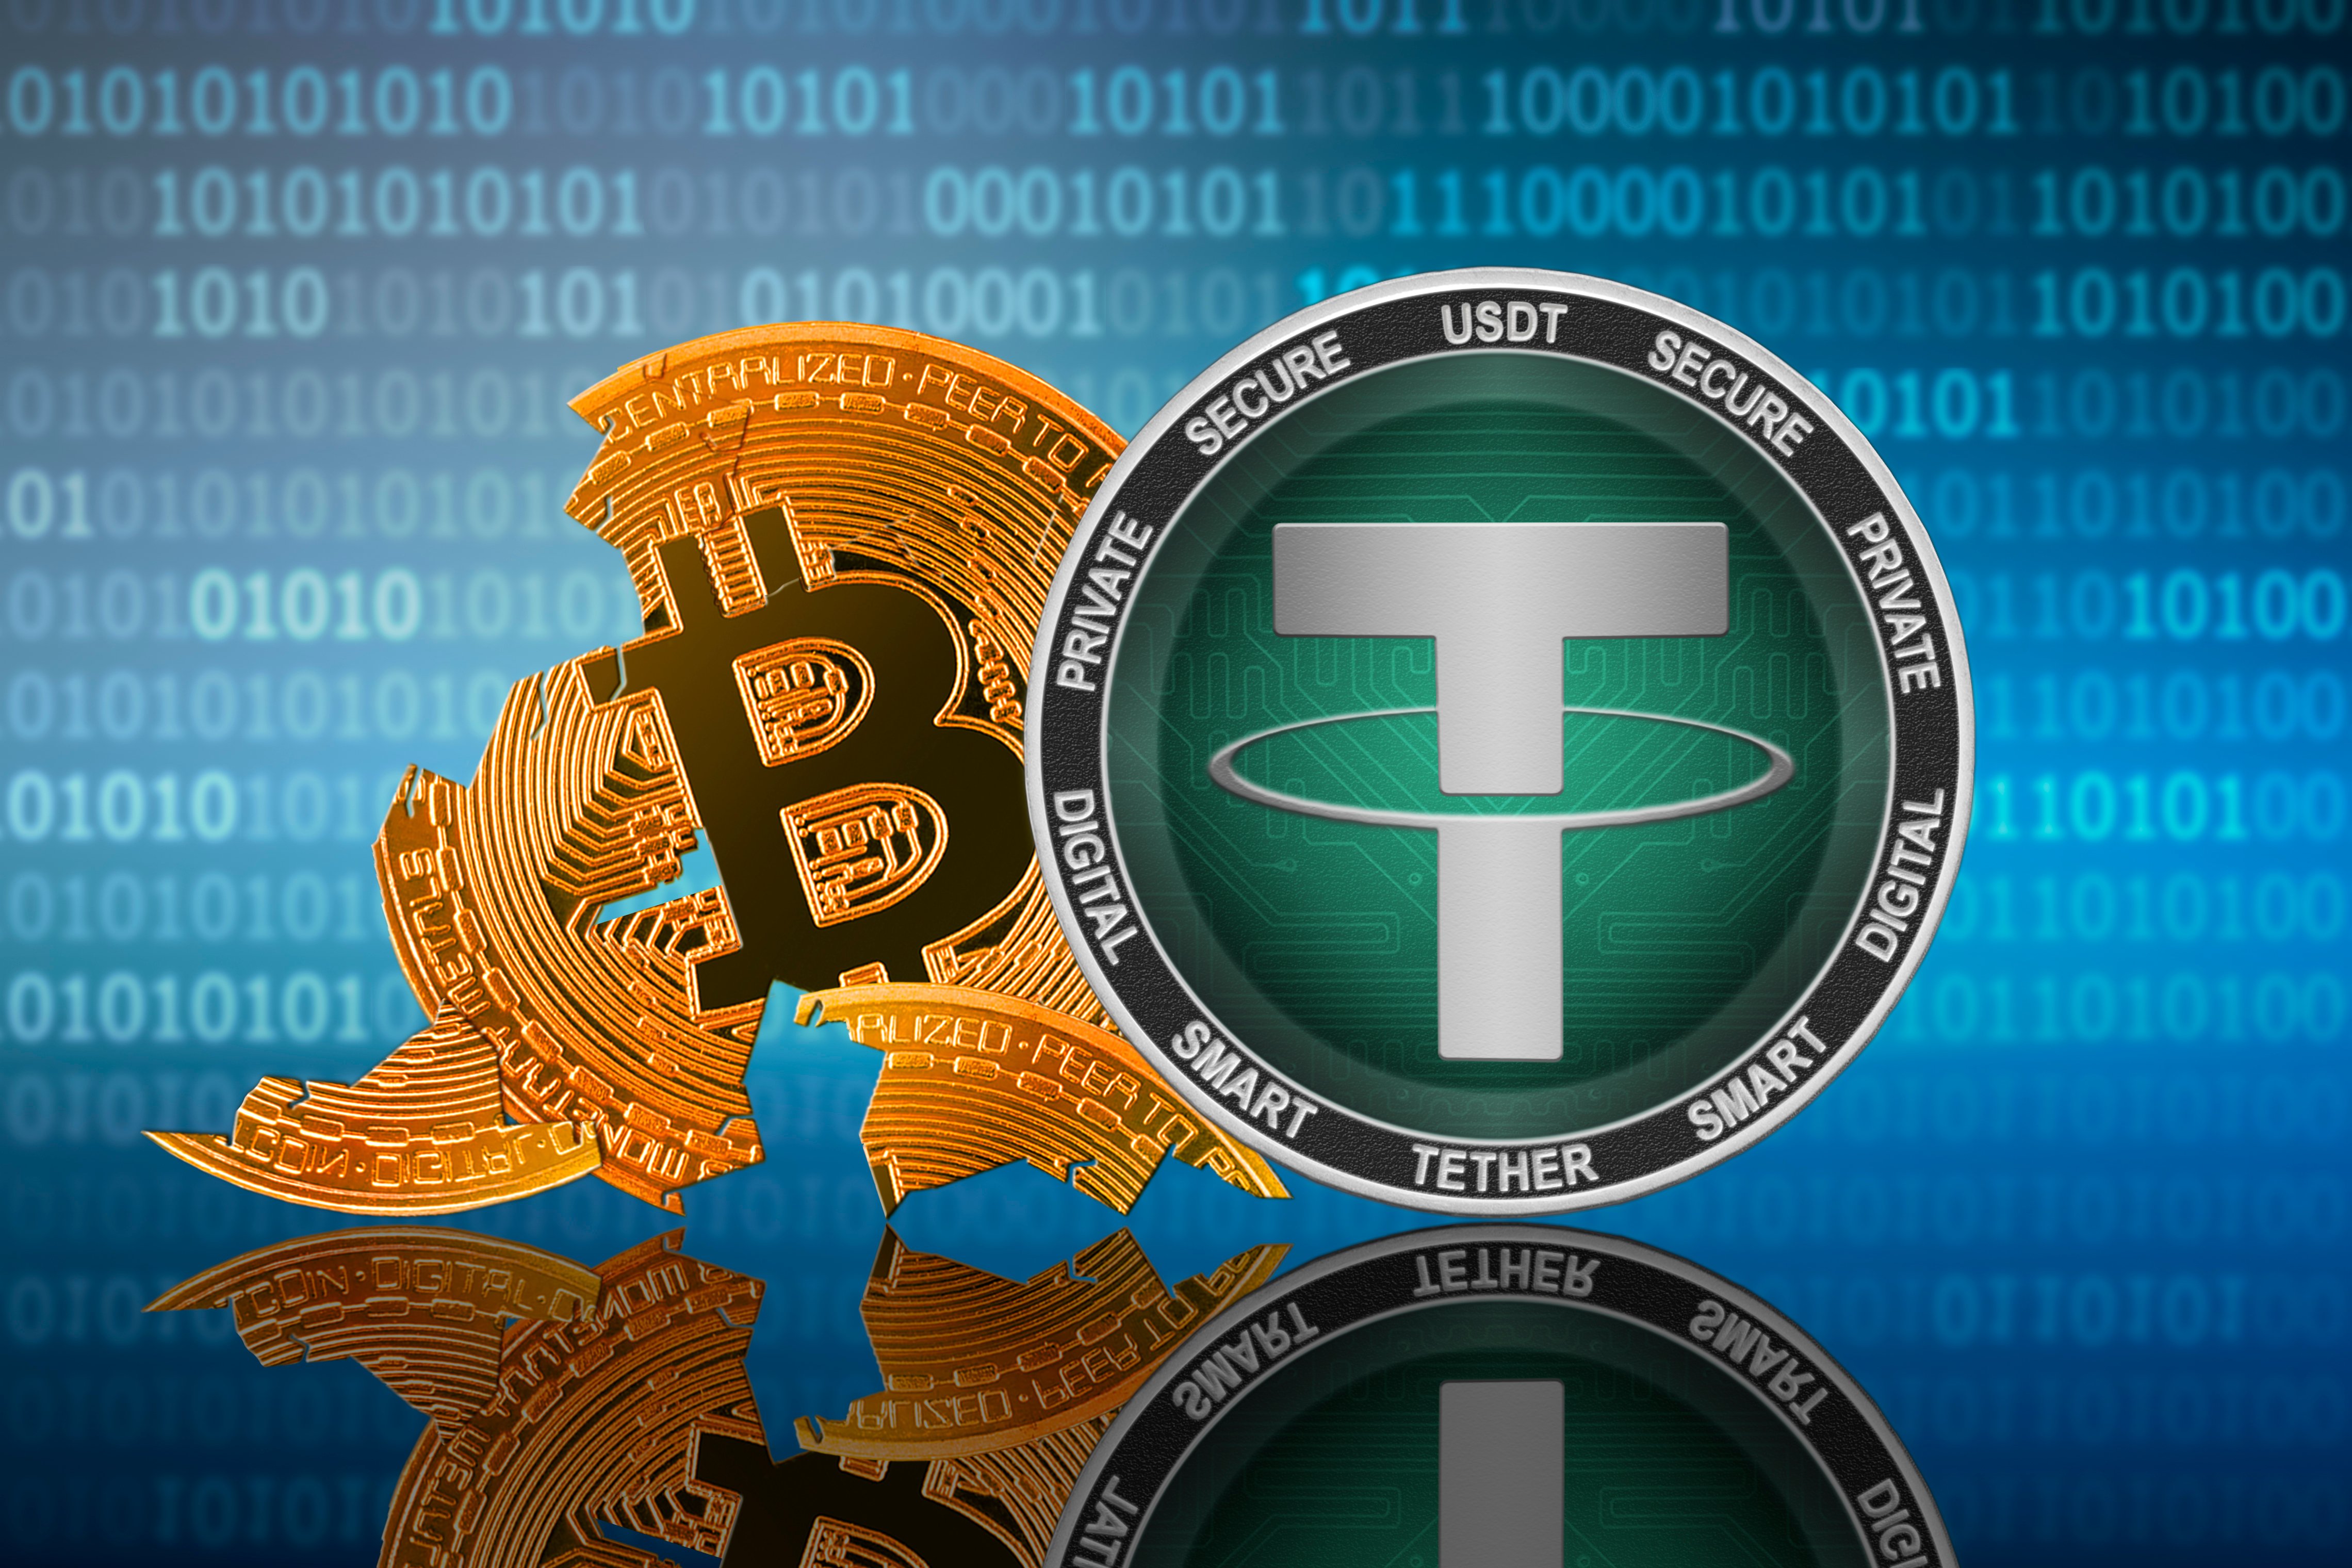 Tether Prints 1B Usdt, Invests In Green Mining Amidst Sec Lawsuit